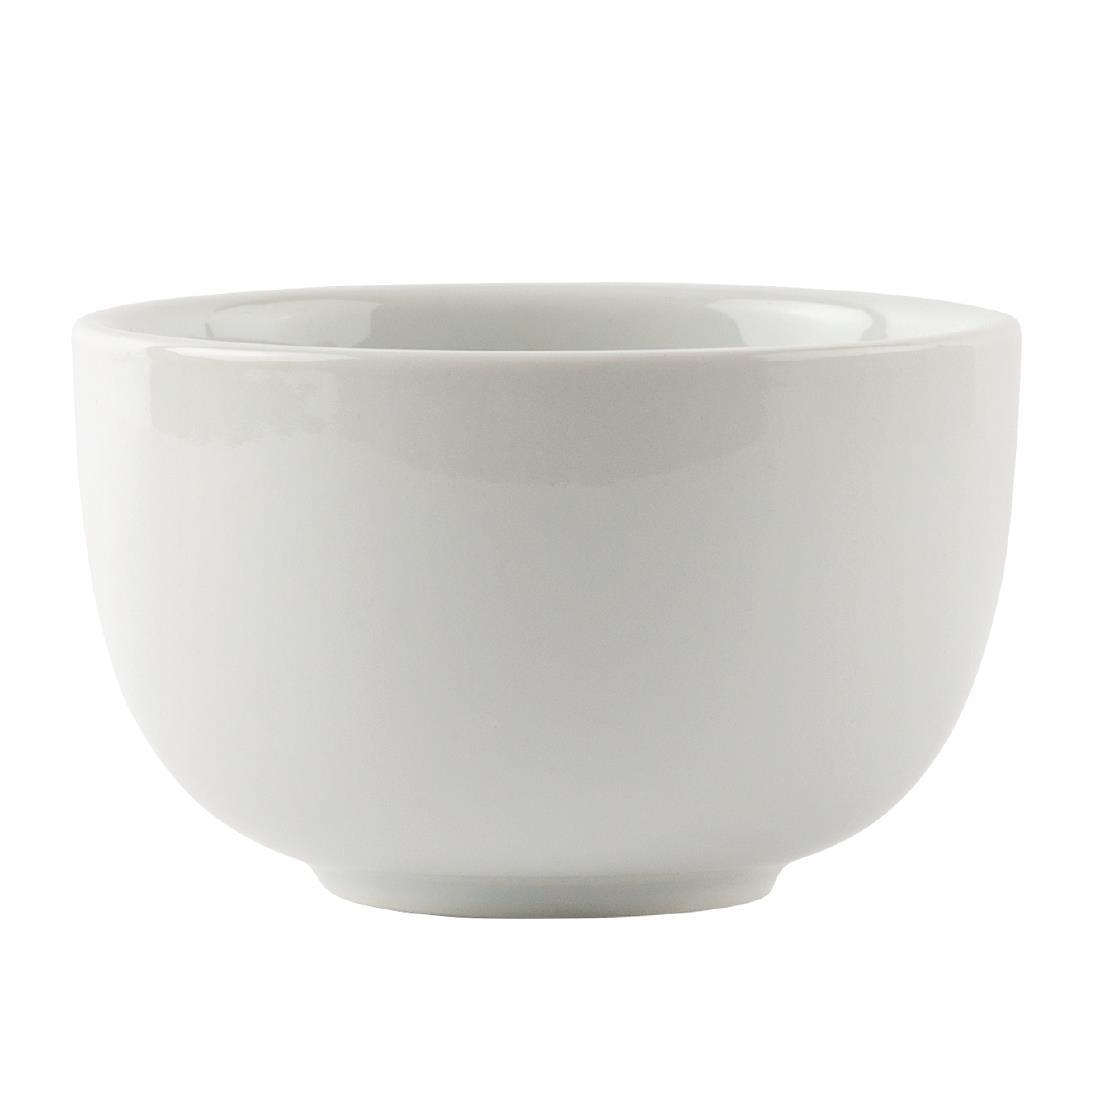 Olympia Whiteware Sugar Bowls 95mm 200ml (Pack of 12) - C250  - 3